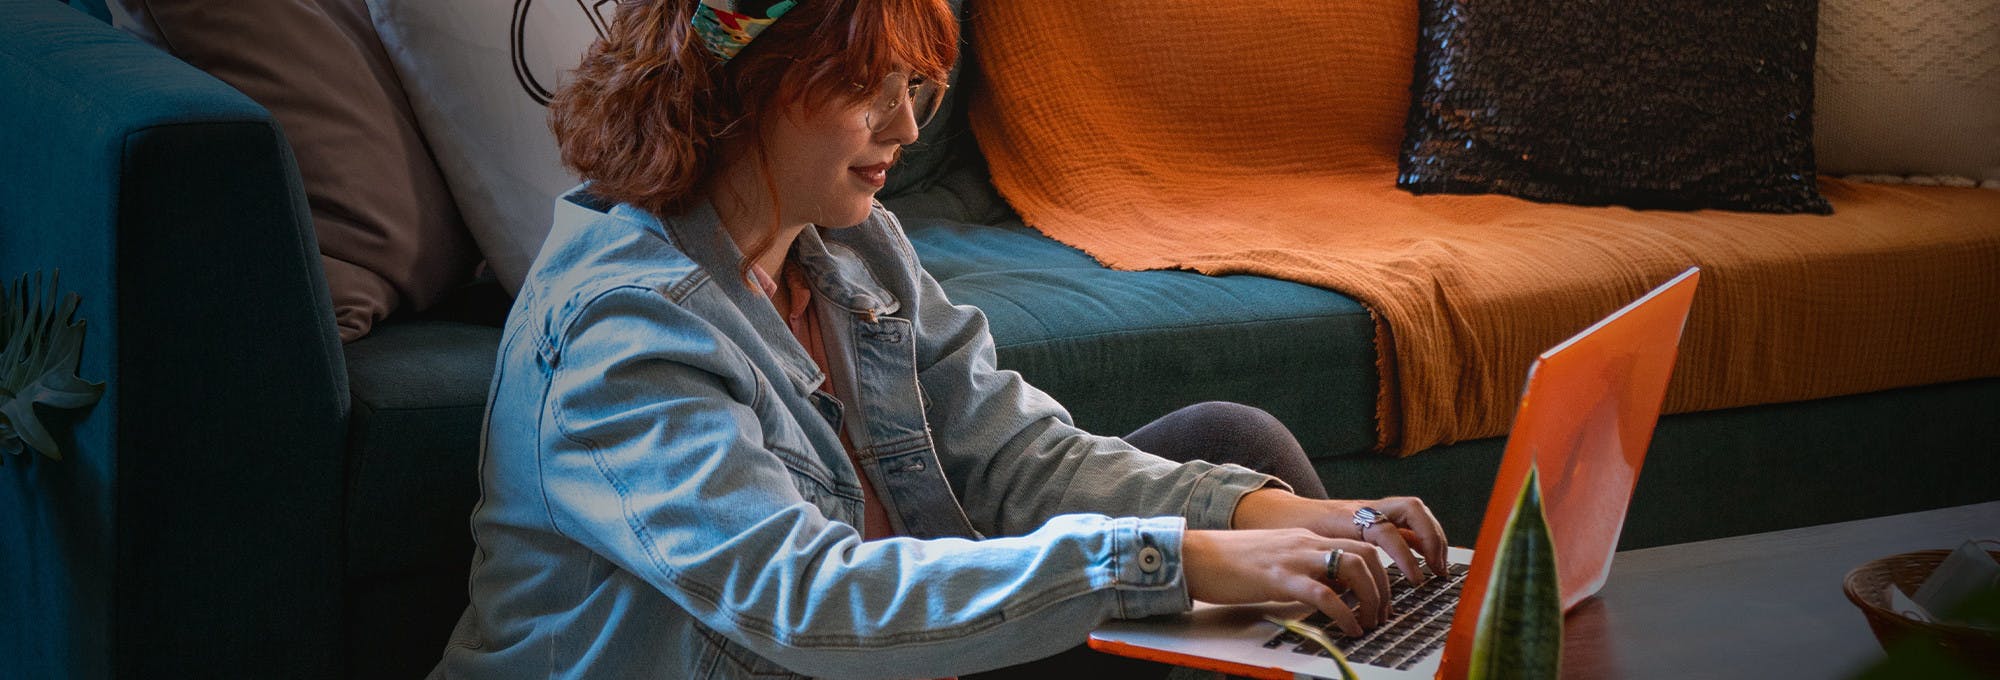 Redhead woman doing college work on her laptop in a living room